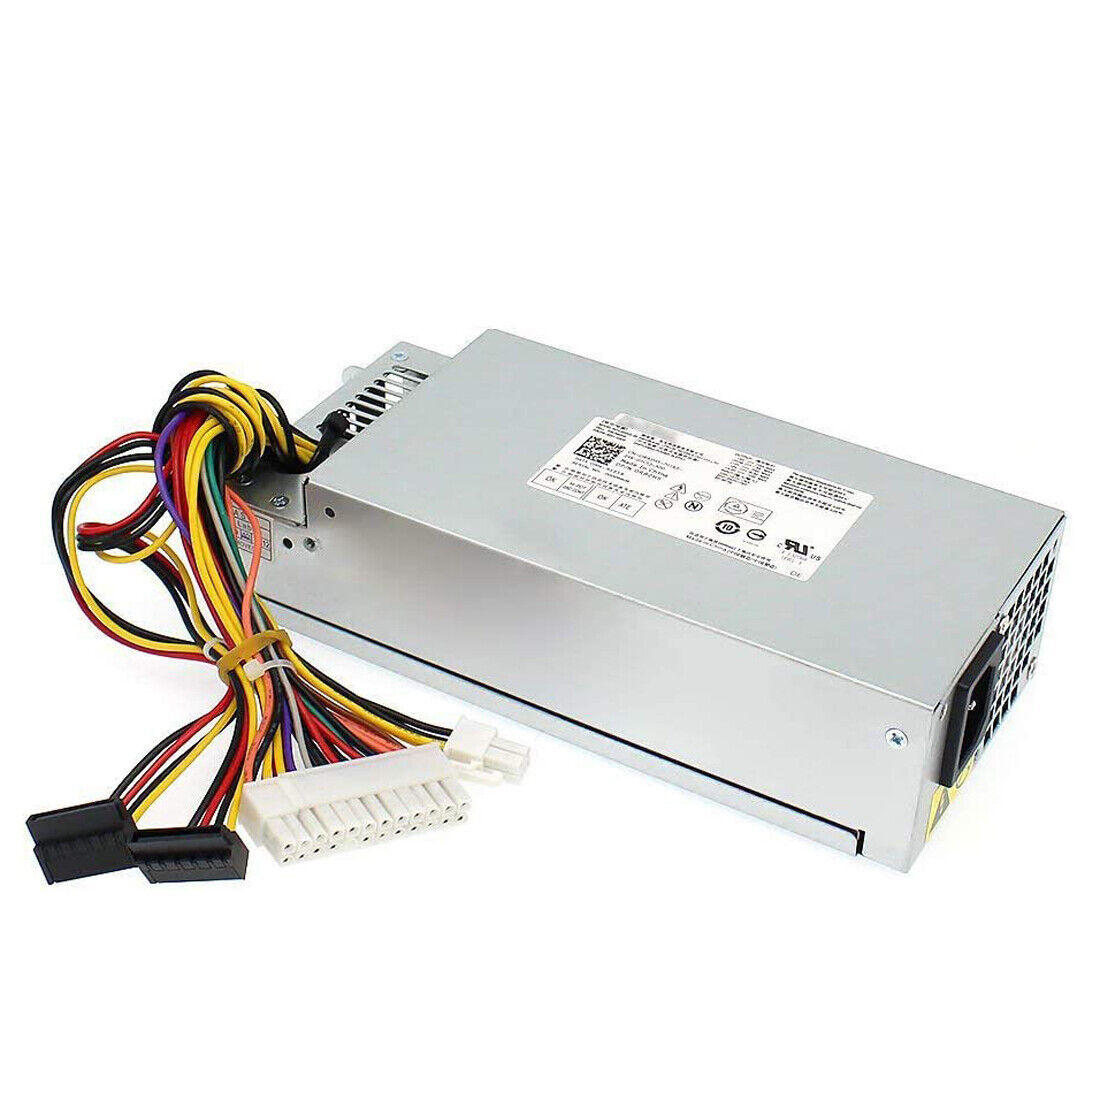 Power Supply 220W H220NS-00 For Dell Inspiron 3647 660S Vostro 270 PSU Series US